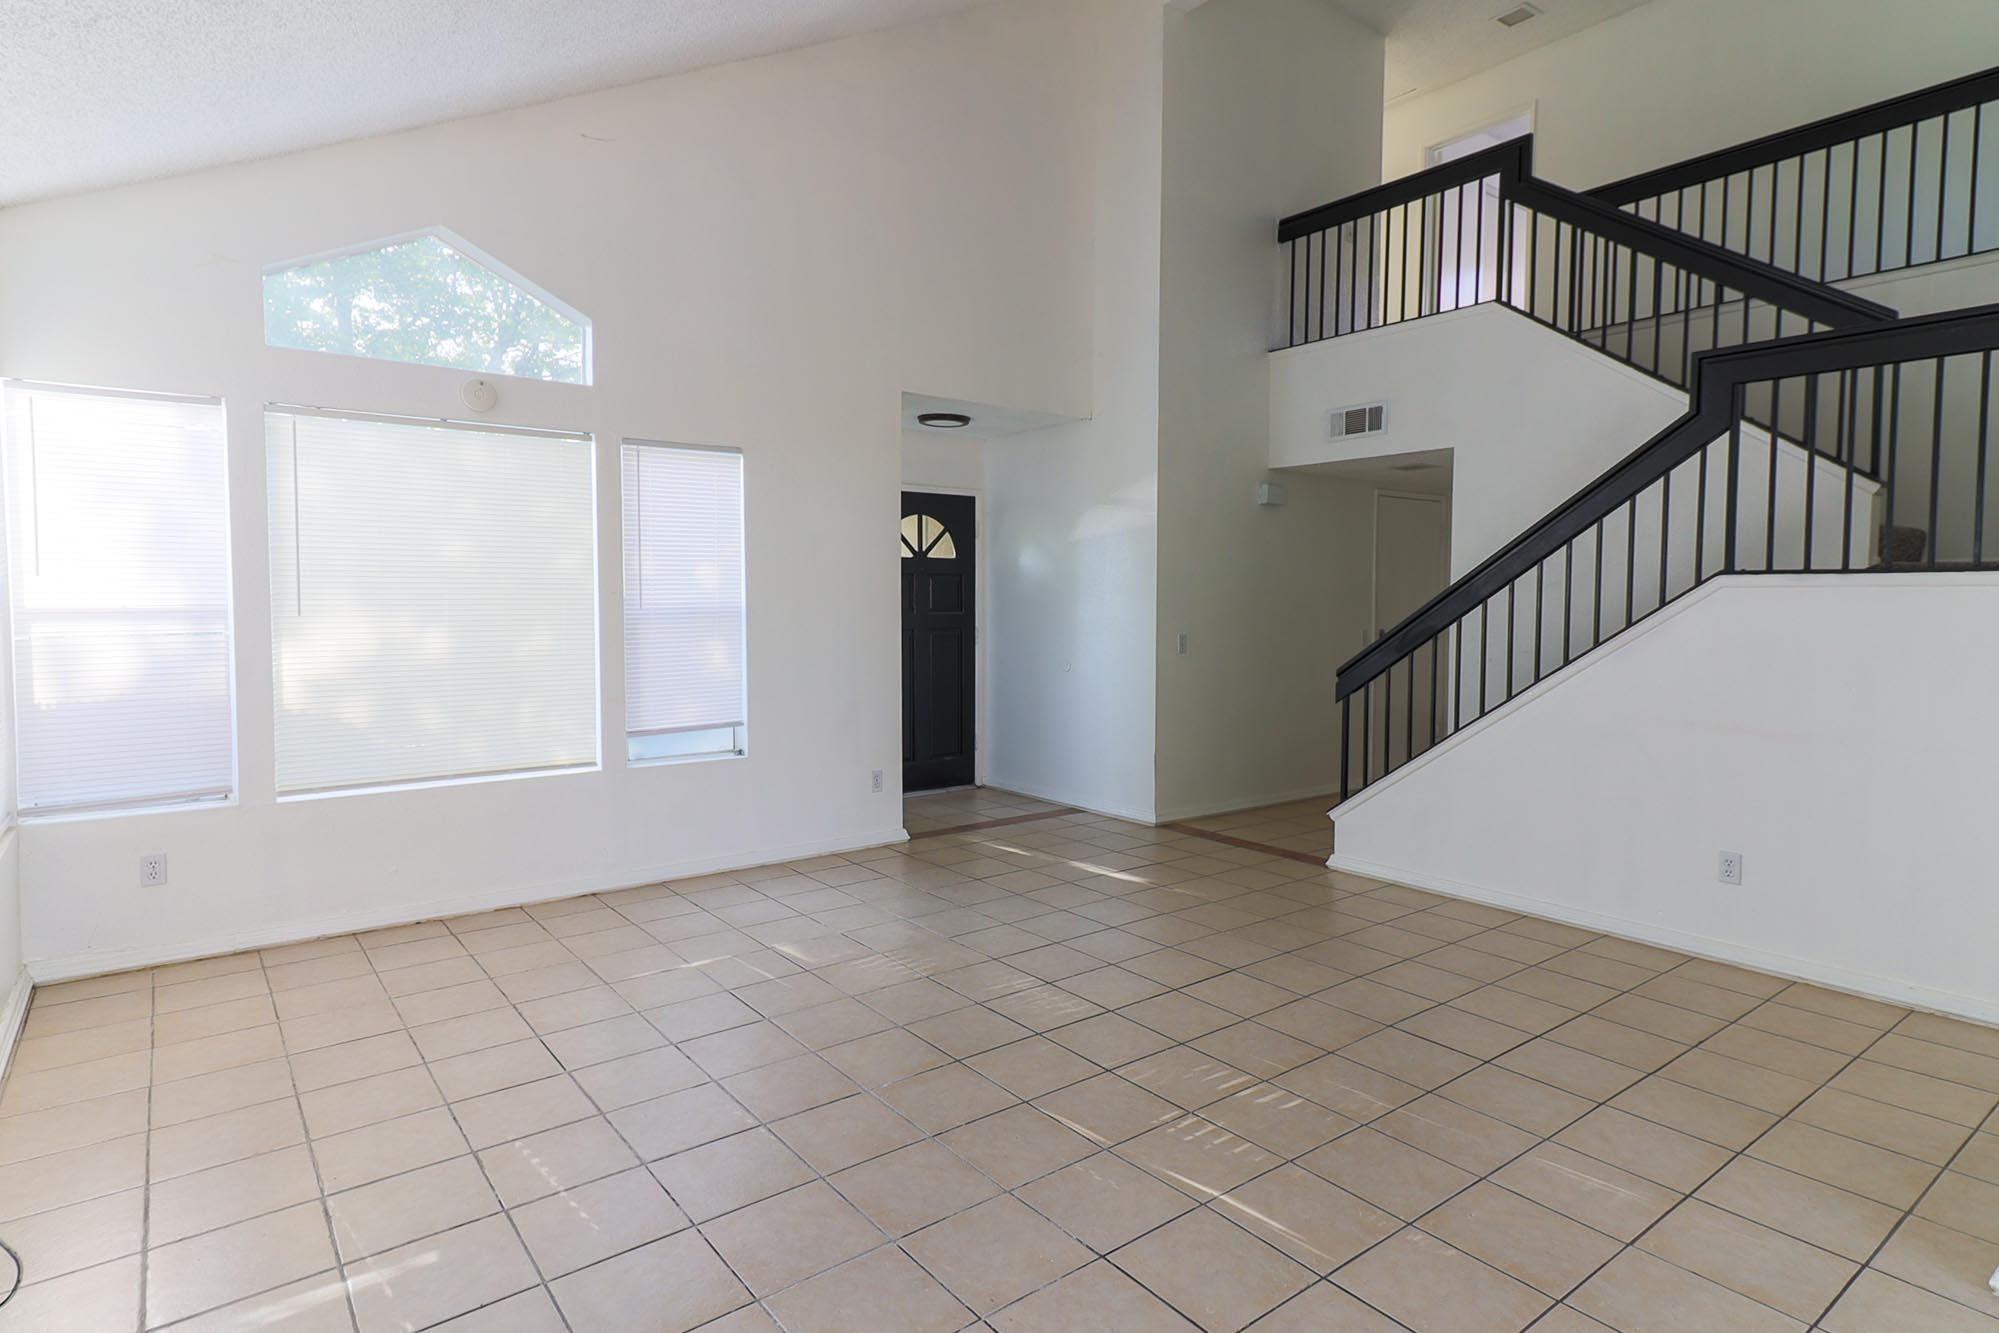 Silverleaf formal living room and entry photo